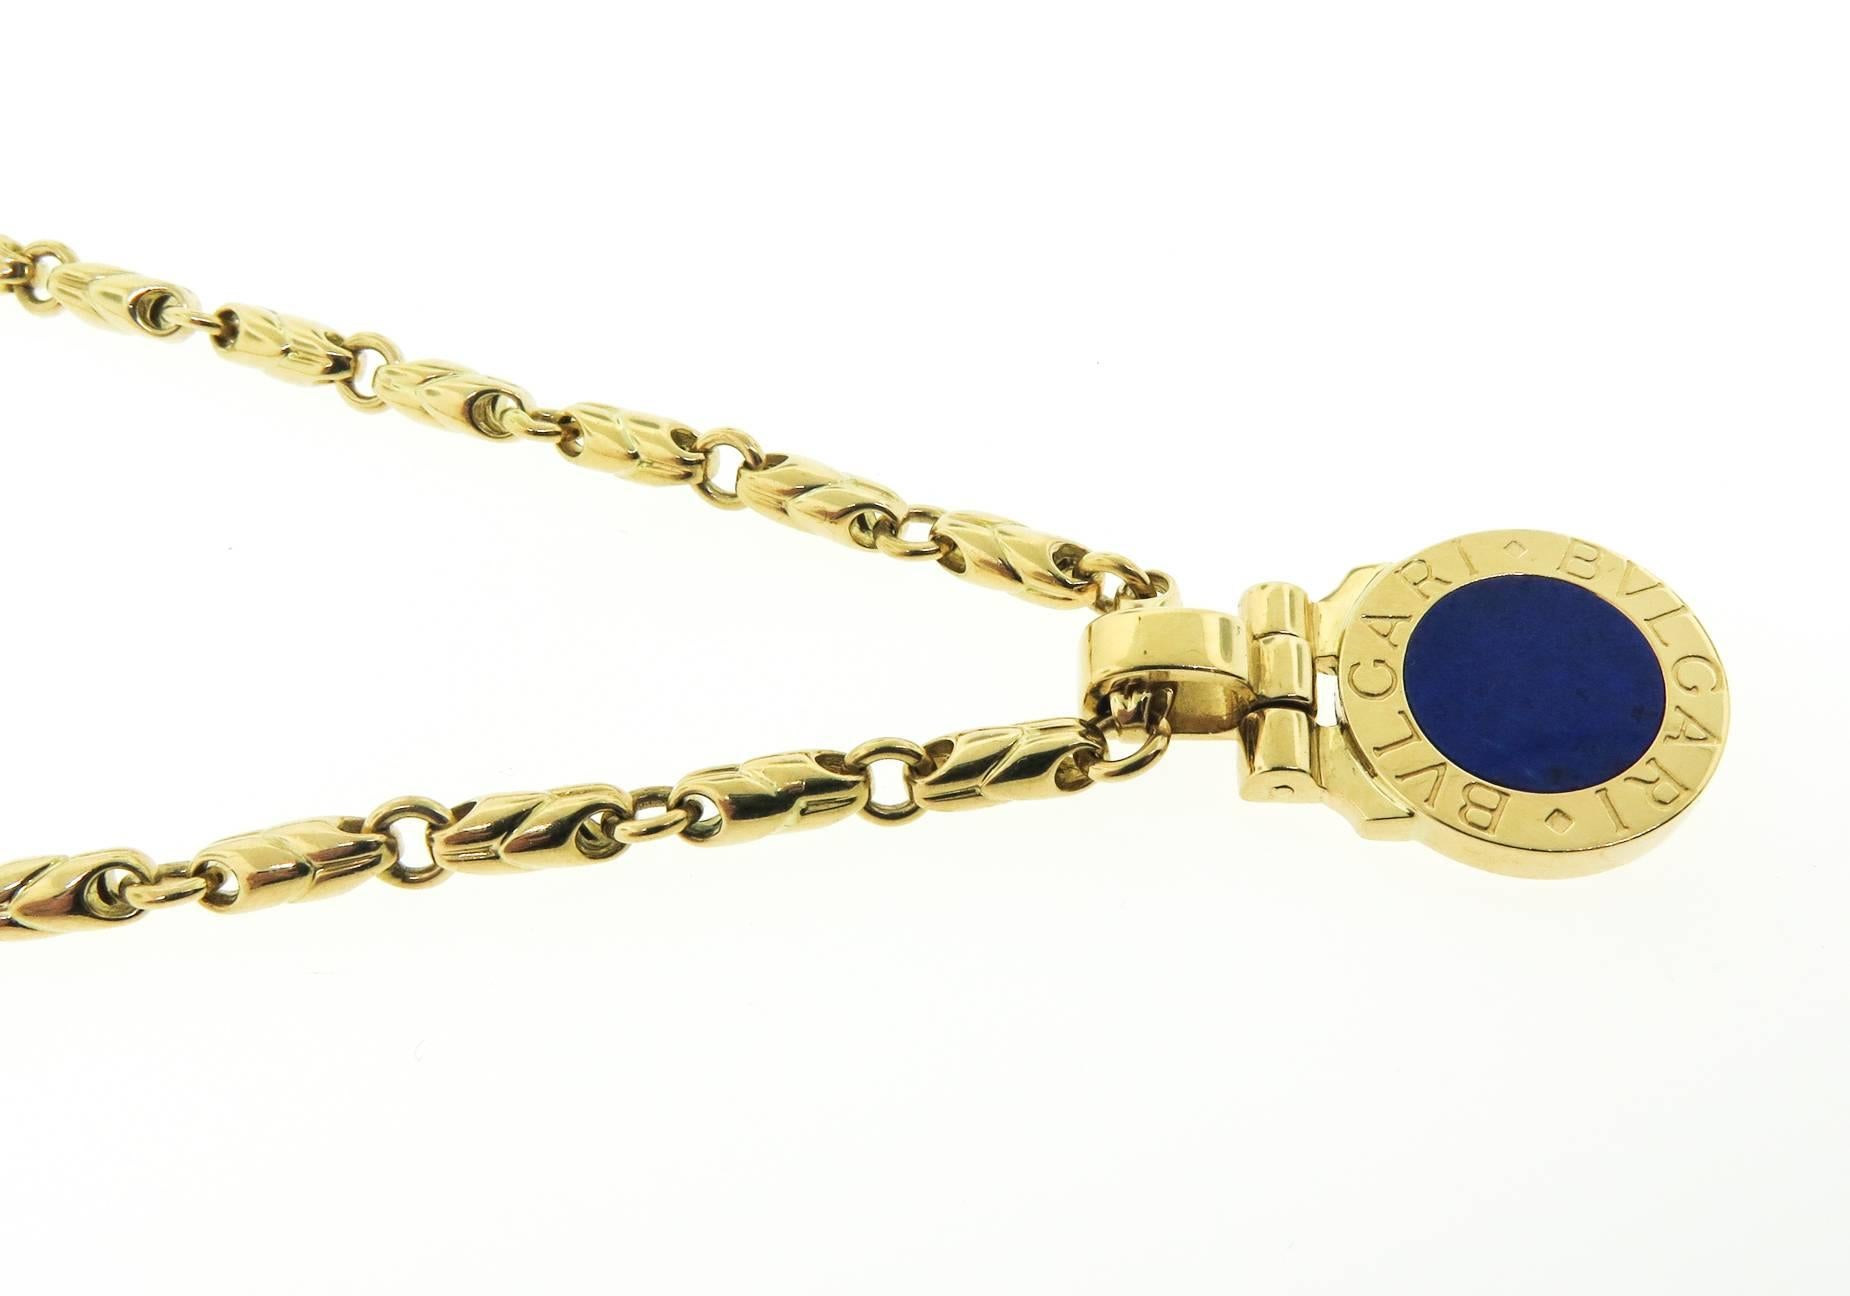 This Bvlgari piece is finely crafted from solid 18k yellow gold. It features a beautiful circular lapis pendant inscribed with Bvlgari - Bvlgari, attached to a sturdy chain. The chain is 22